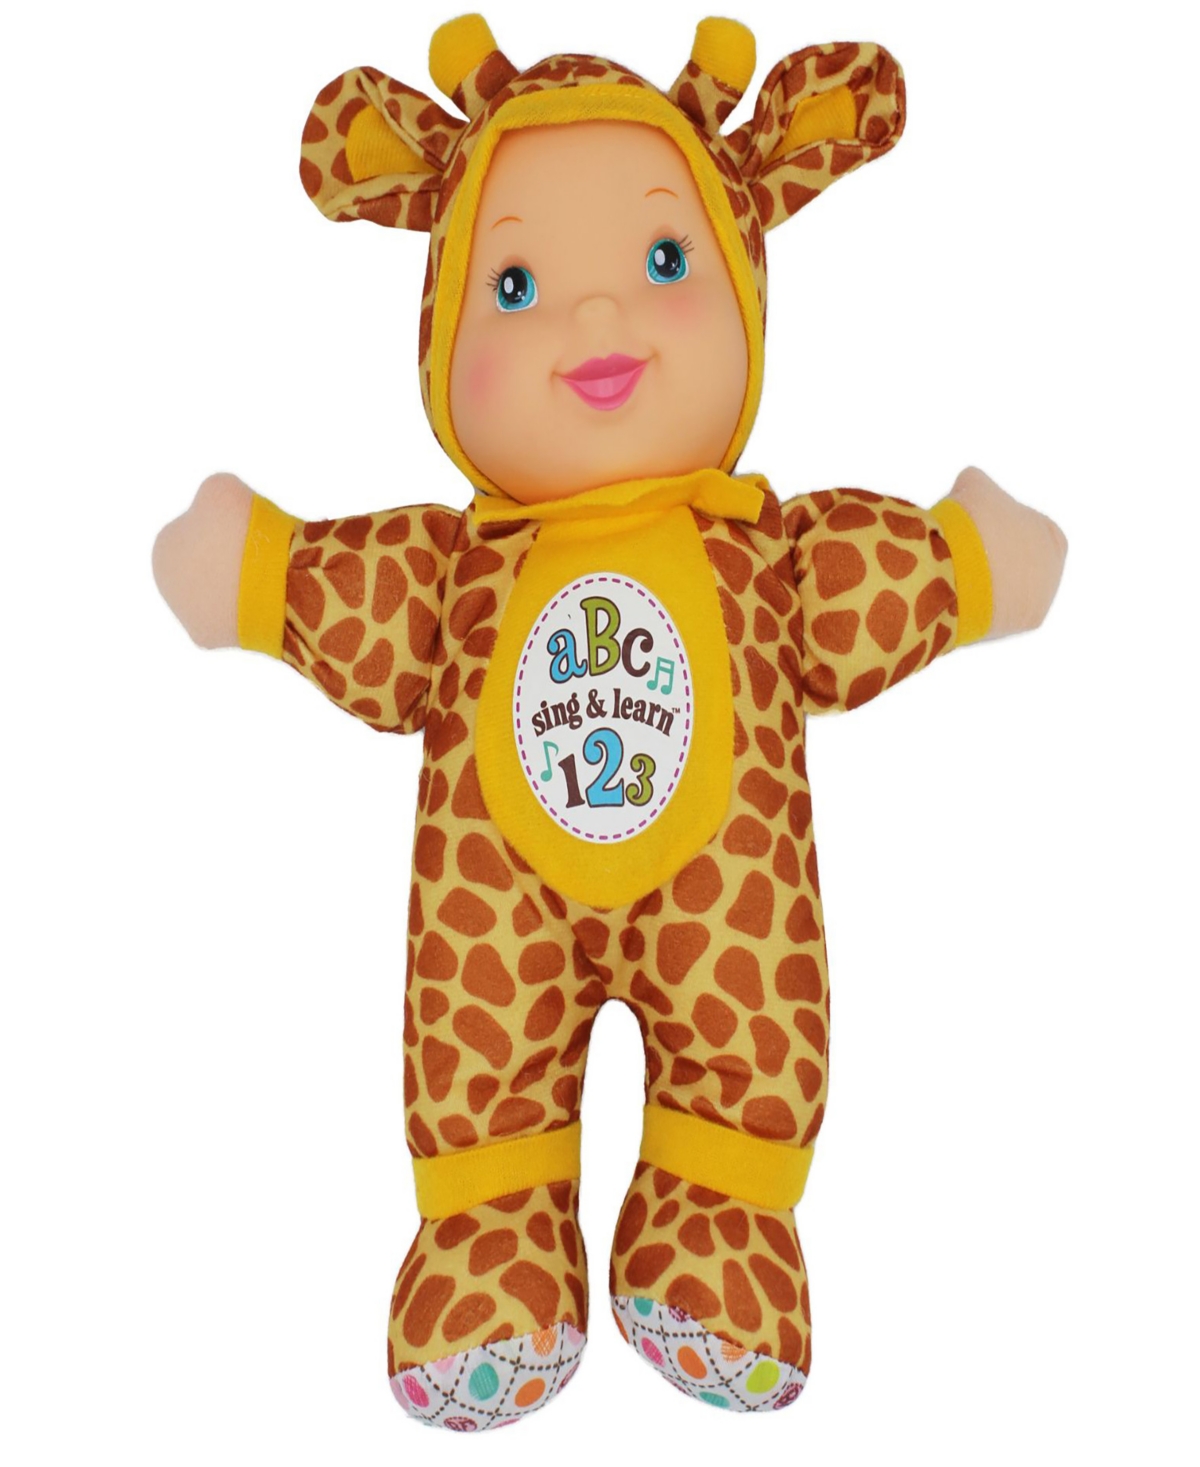 Baby's First By Nemcor Babies' Goldberger Doll Sing Learn Giraffe Bi-lingual English And Spanish In Multi